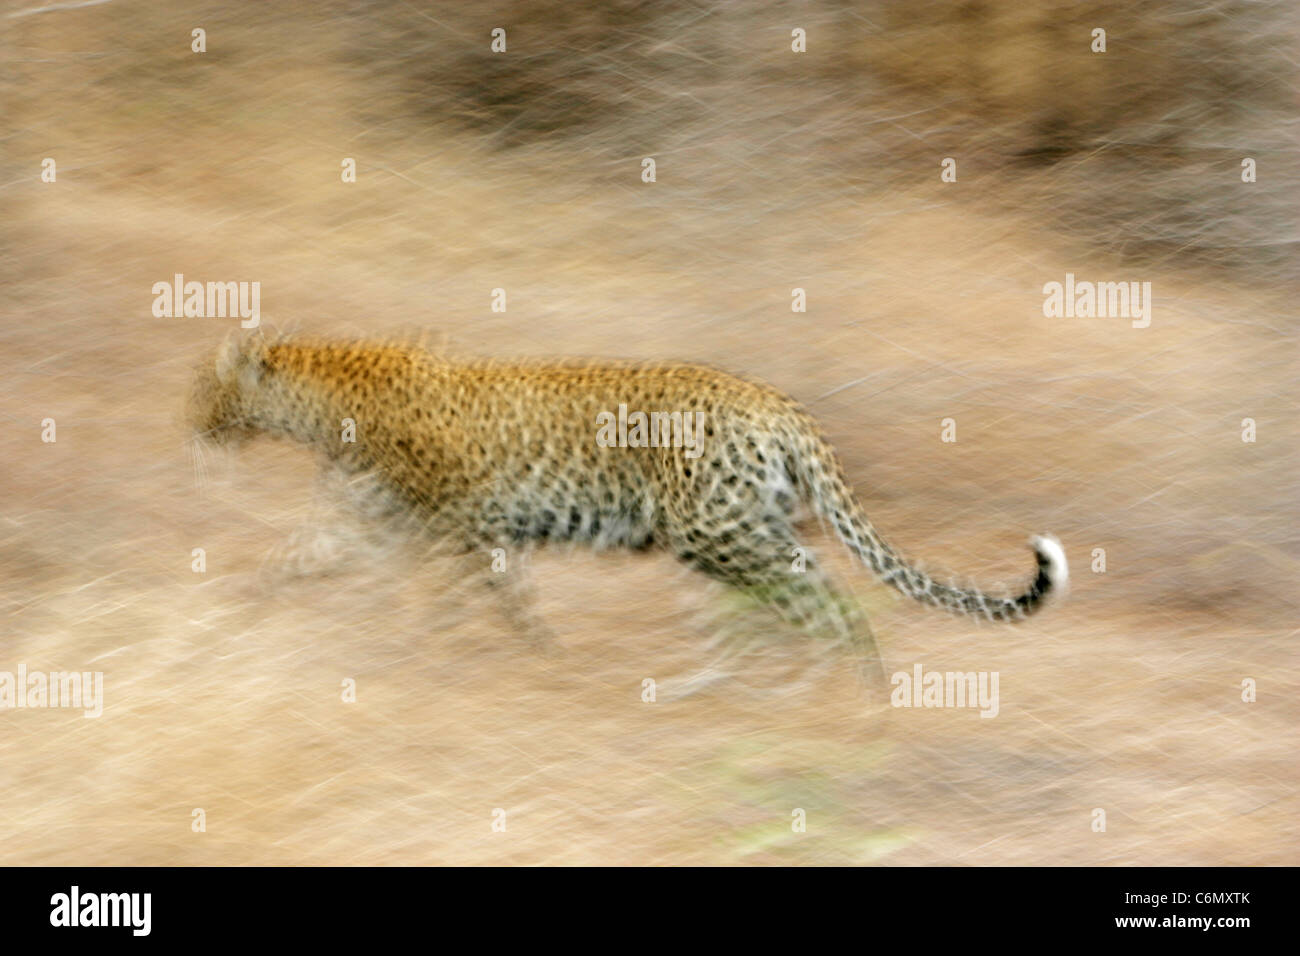 Abstract image of a Leopard running Stock Photo